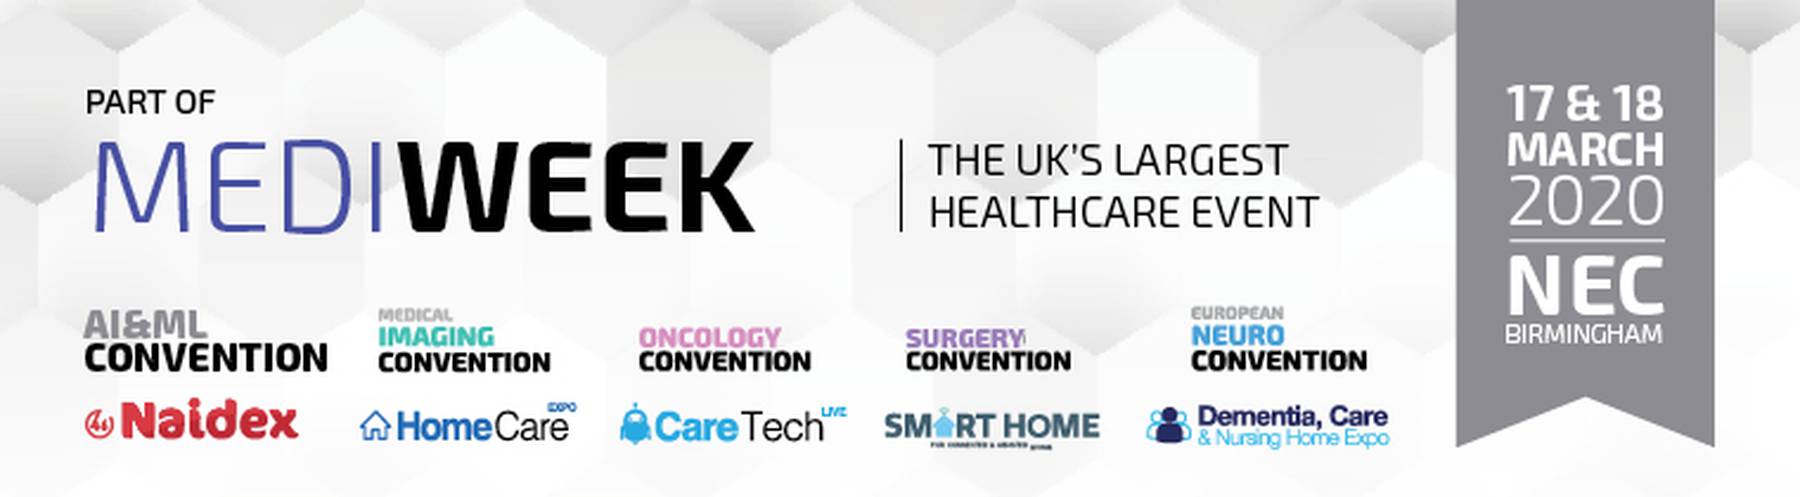 Part of Mediweek the UK's largest healthcare event